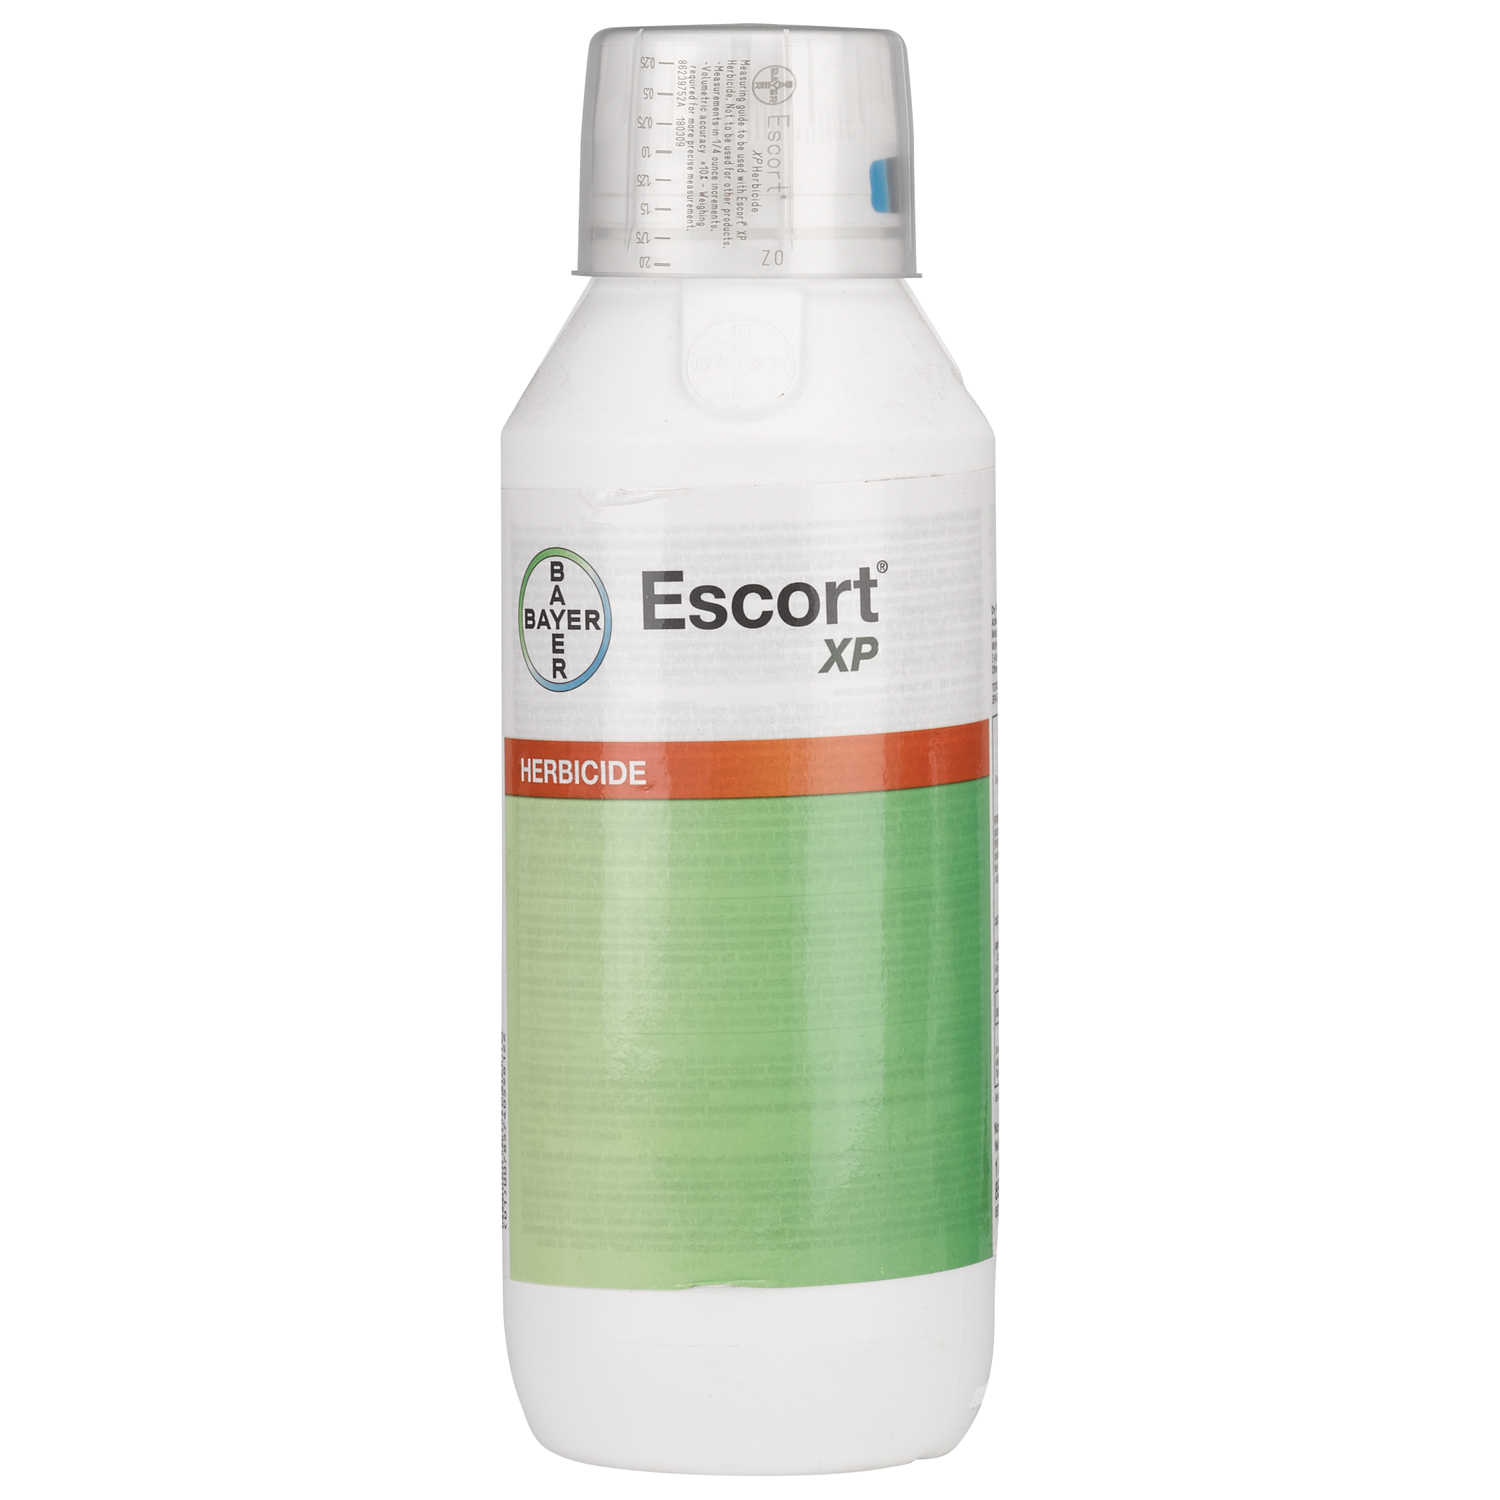 Escort Xp Herbicide Forestry Suppliers Inc